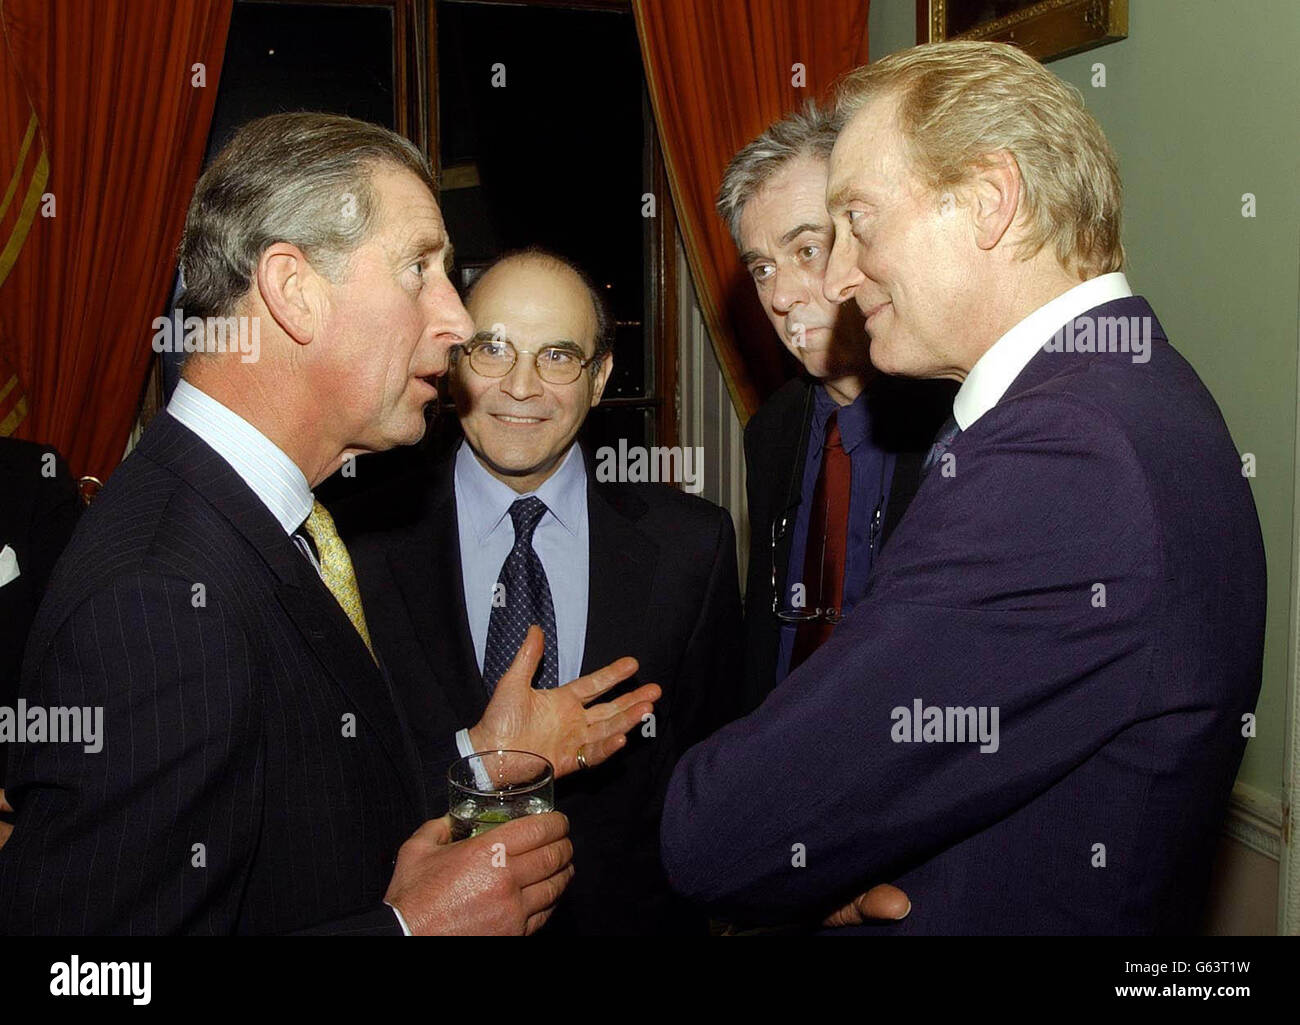 The Prince of Wales talks with actor Charles Dance (right), as David Suchet (second left) and Nicholas Le Prevost listen in, during a reception for Actors of the Royal Shakespeare Company of which the Prince is president, at Home House, cantral London. Stock Photo